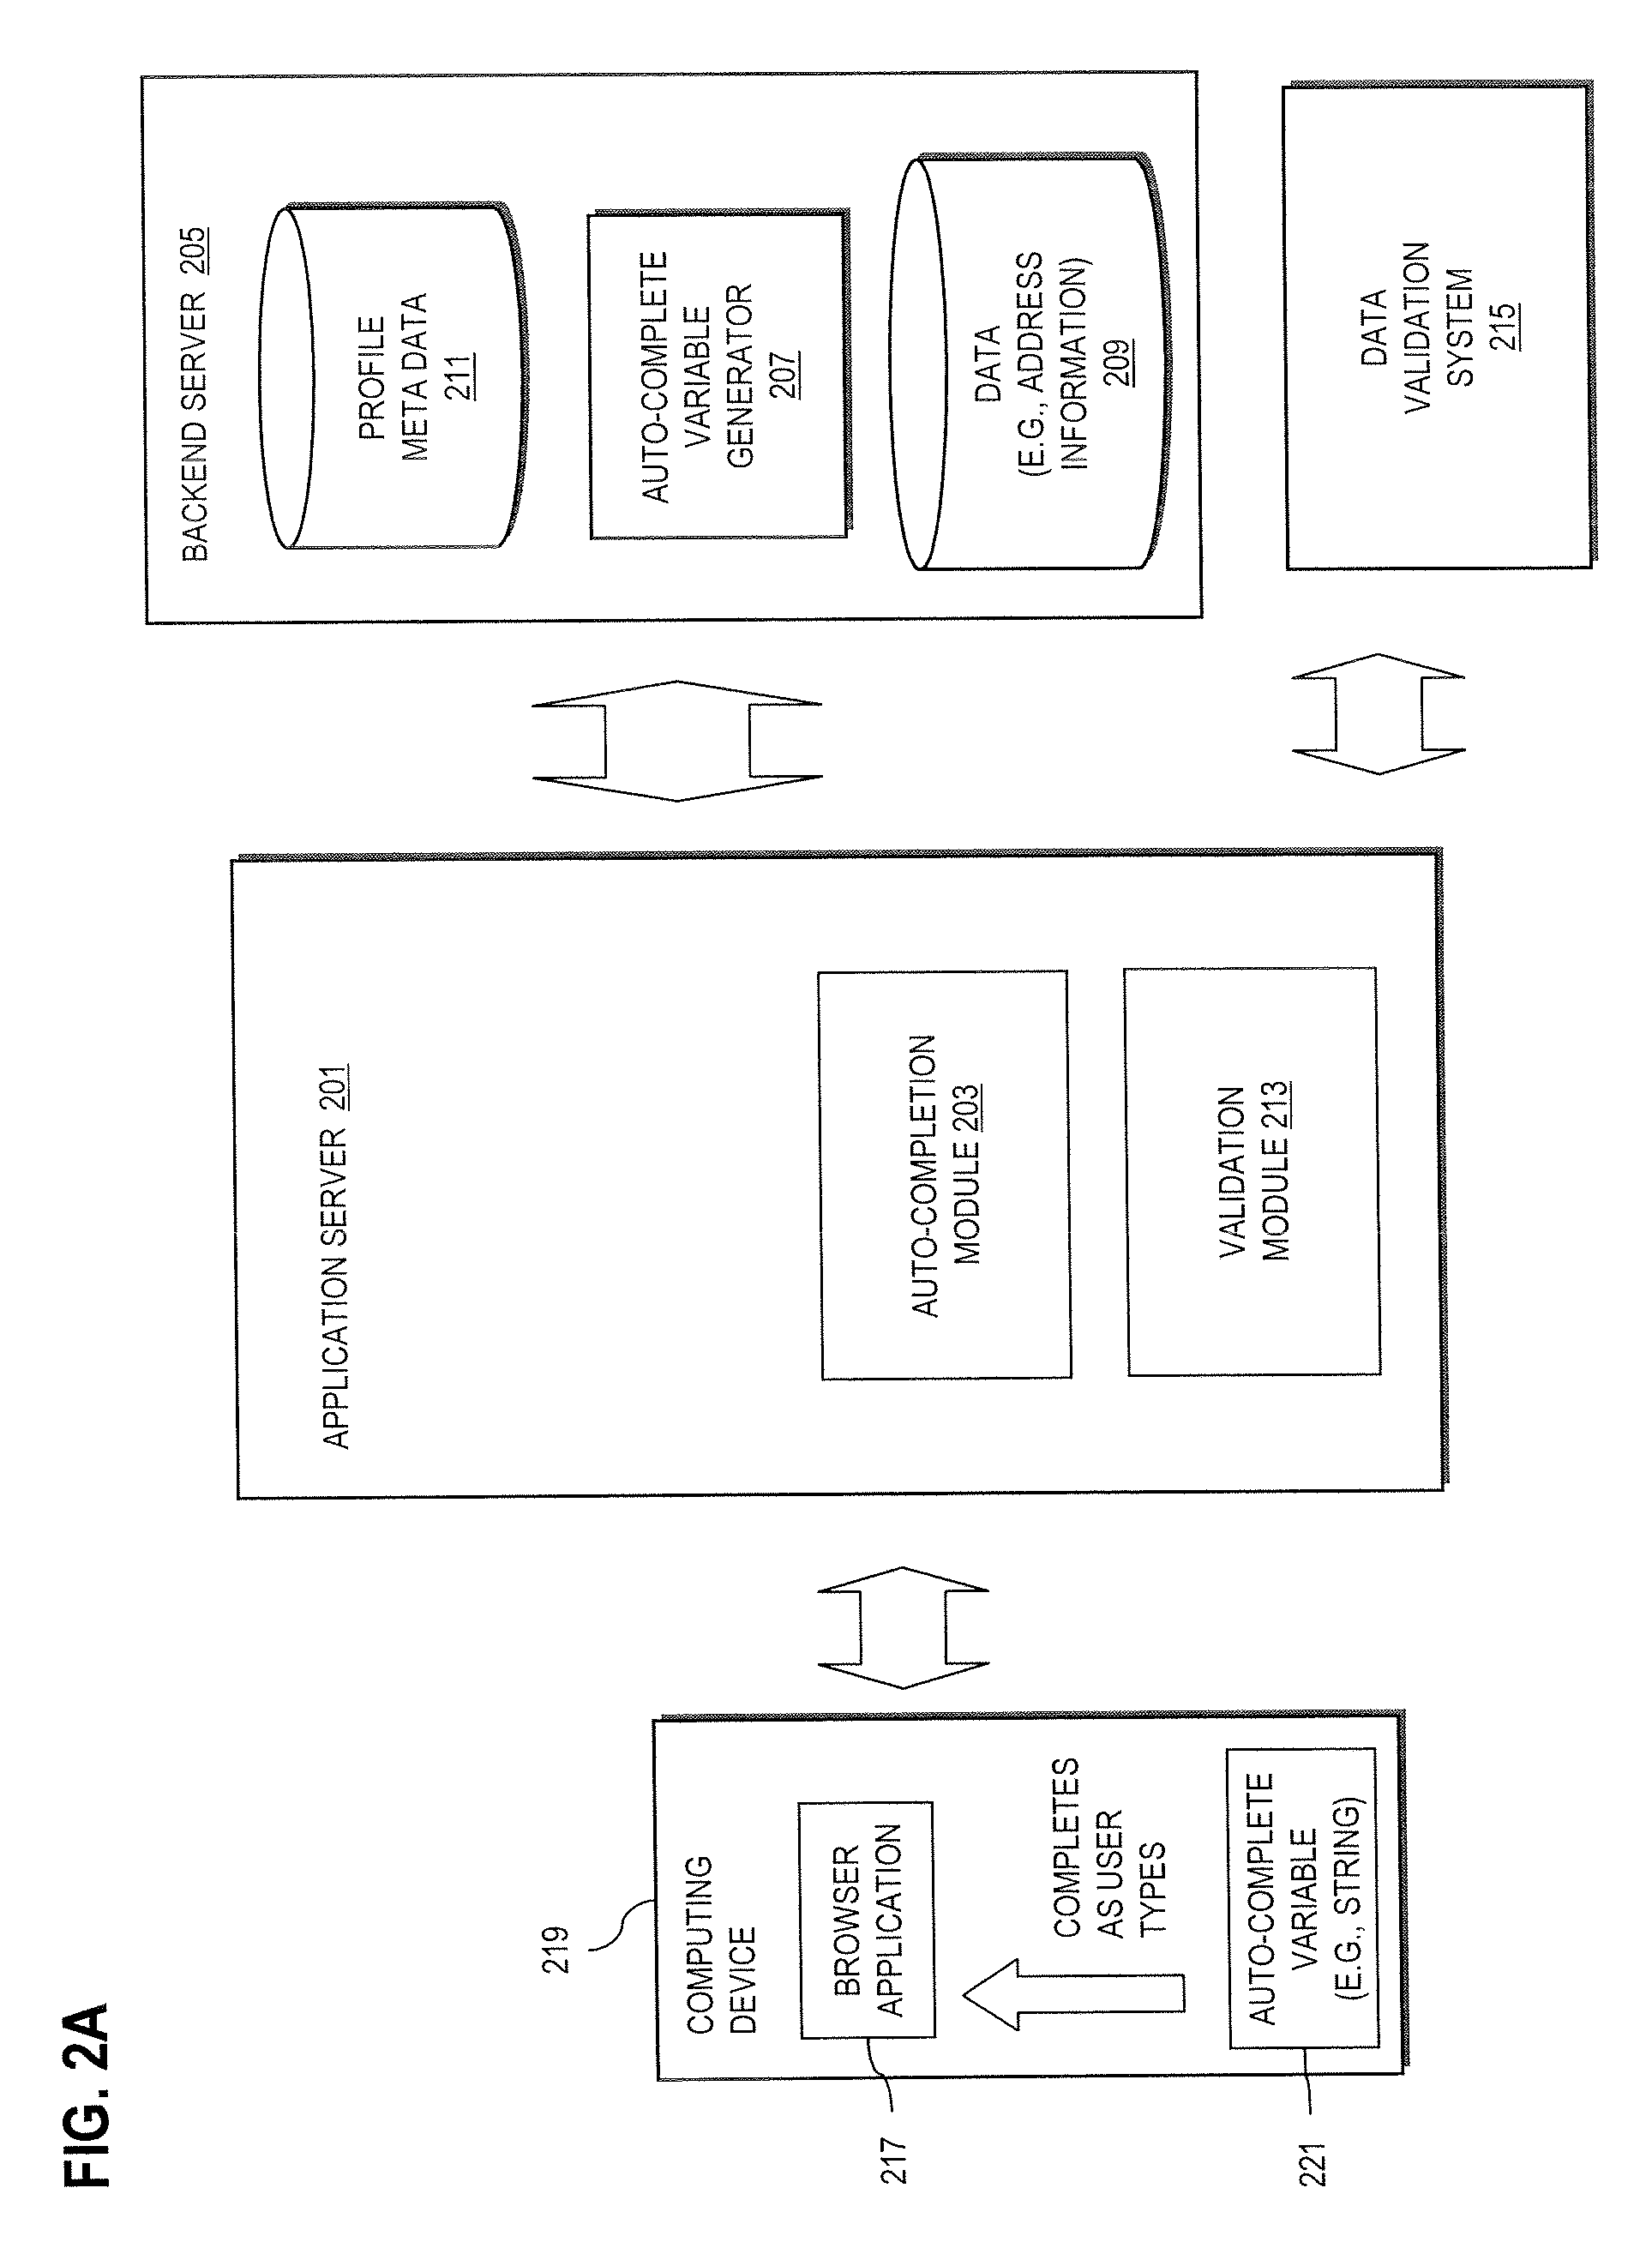 Method and apparatus for providing auto-completion of information using strings